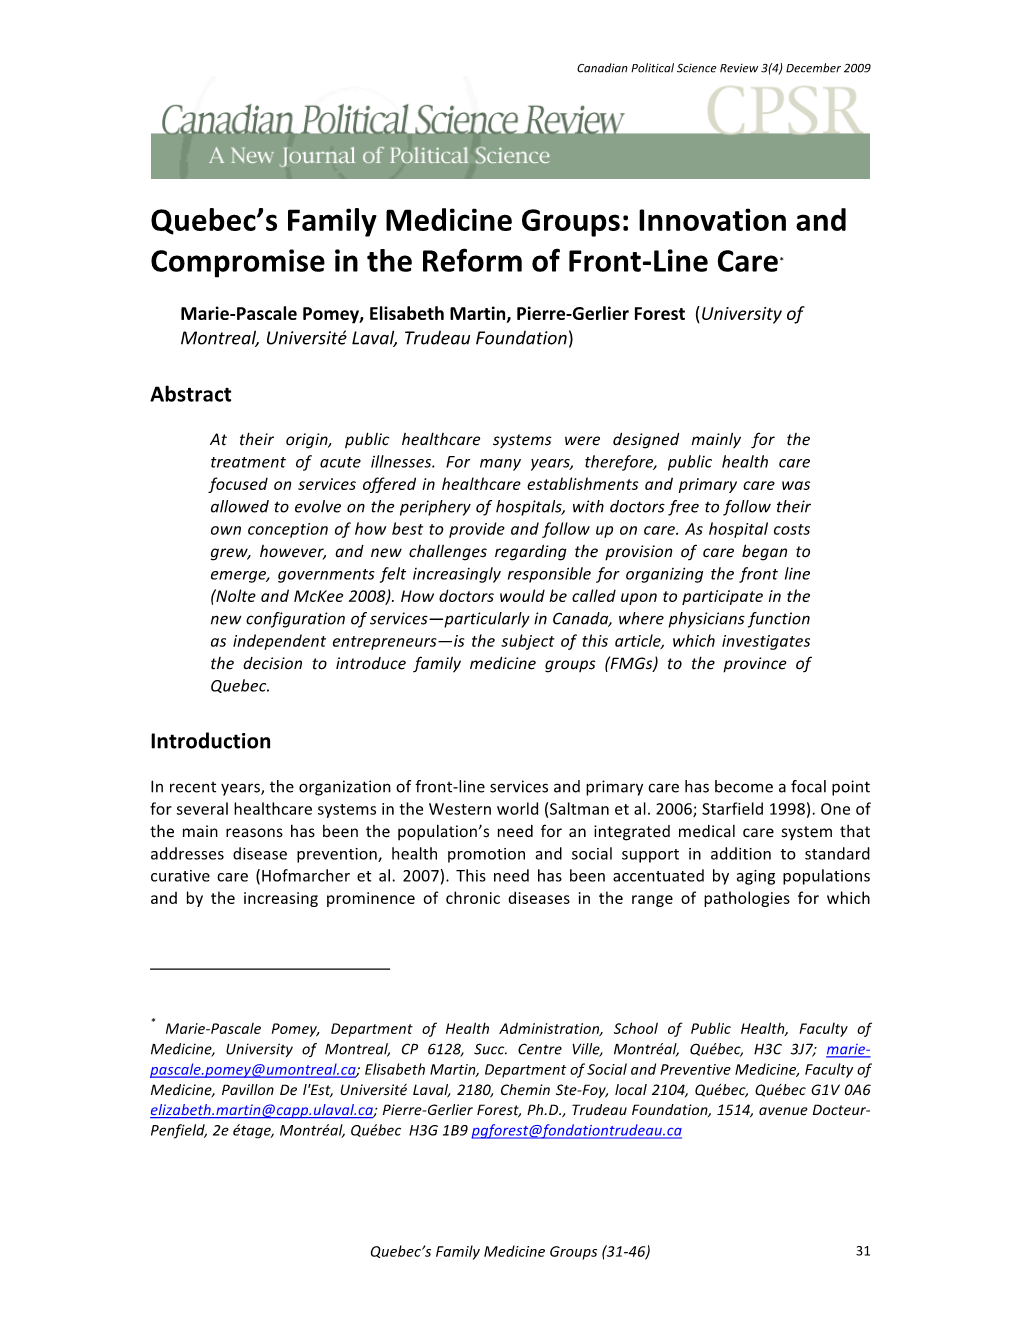 Quebec's Family Medicine Groups: Innovation and Compromise in The